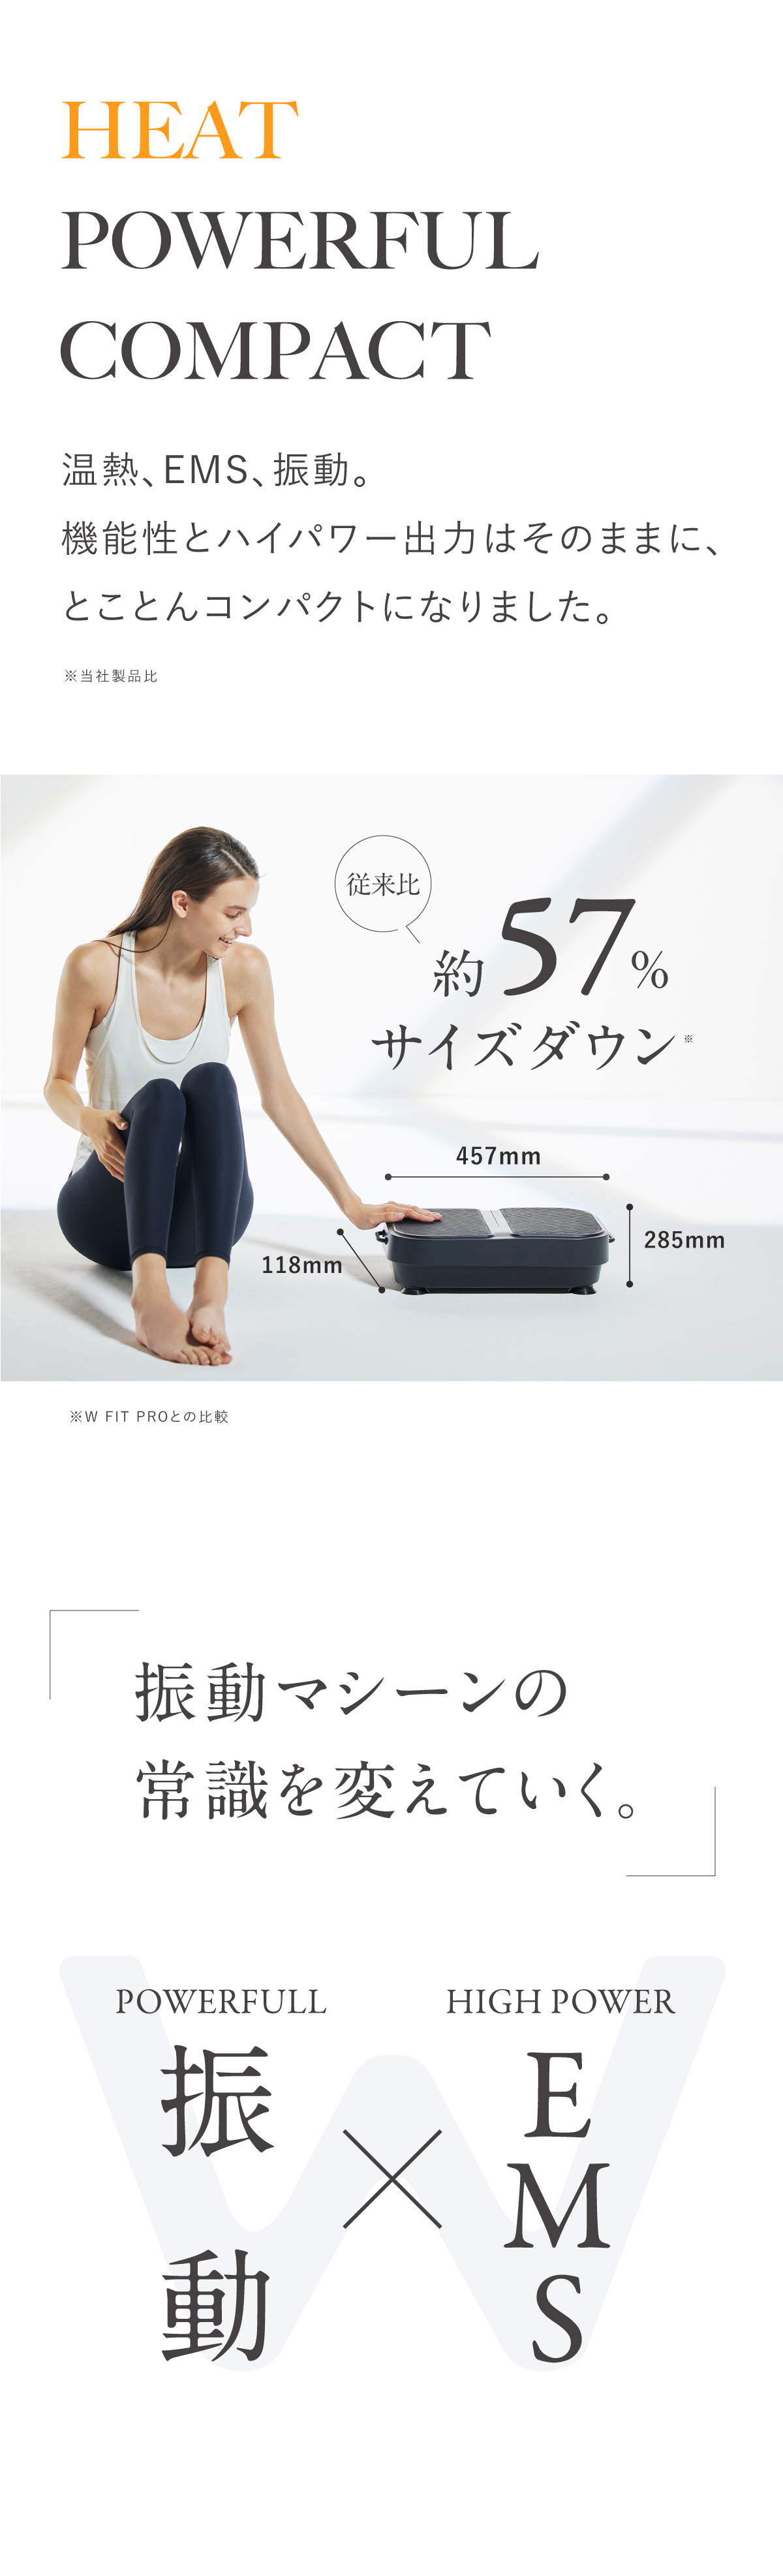 ◆MYTREX W FIT ACTIVE(EMSマシン) ◆自宅でダイエット◆